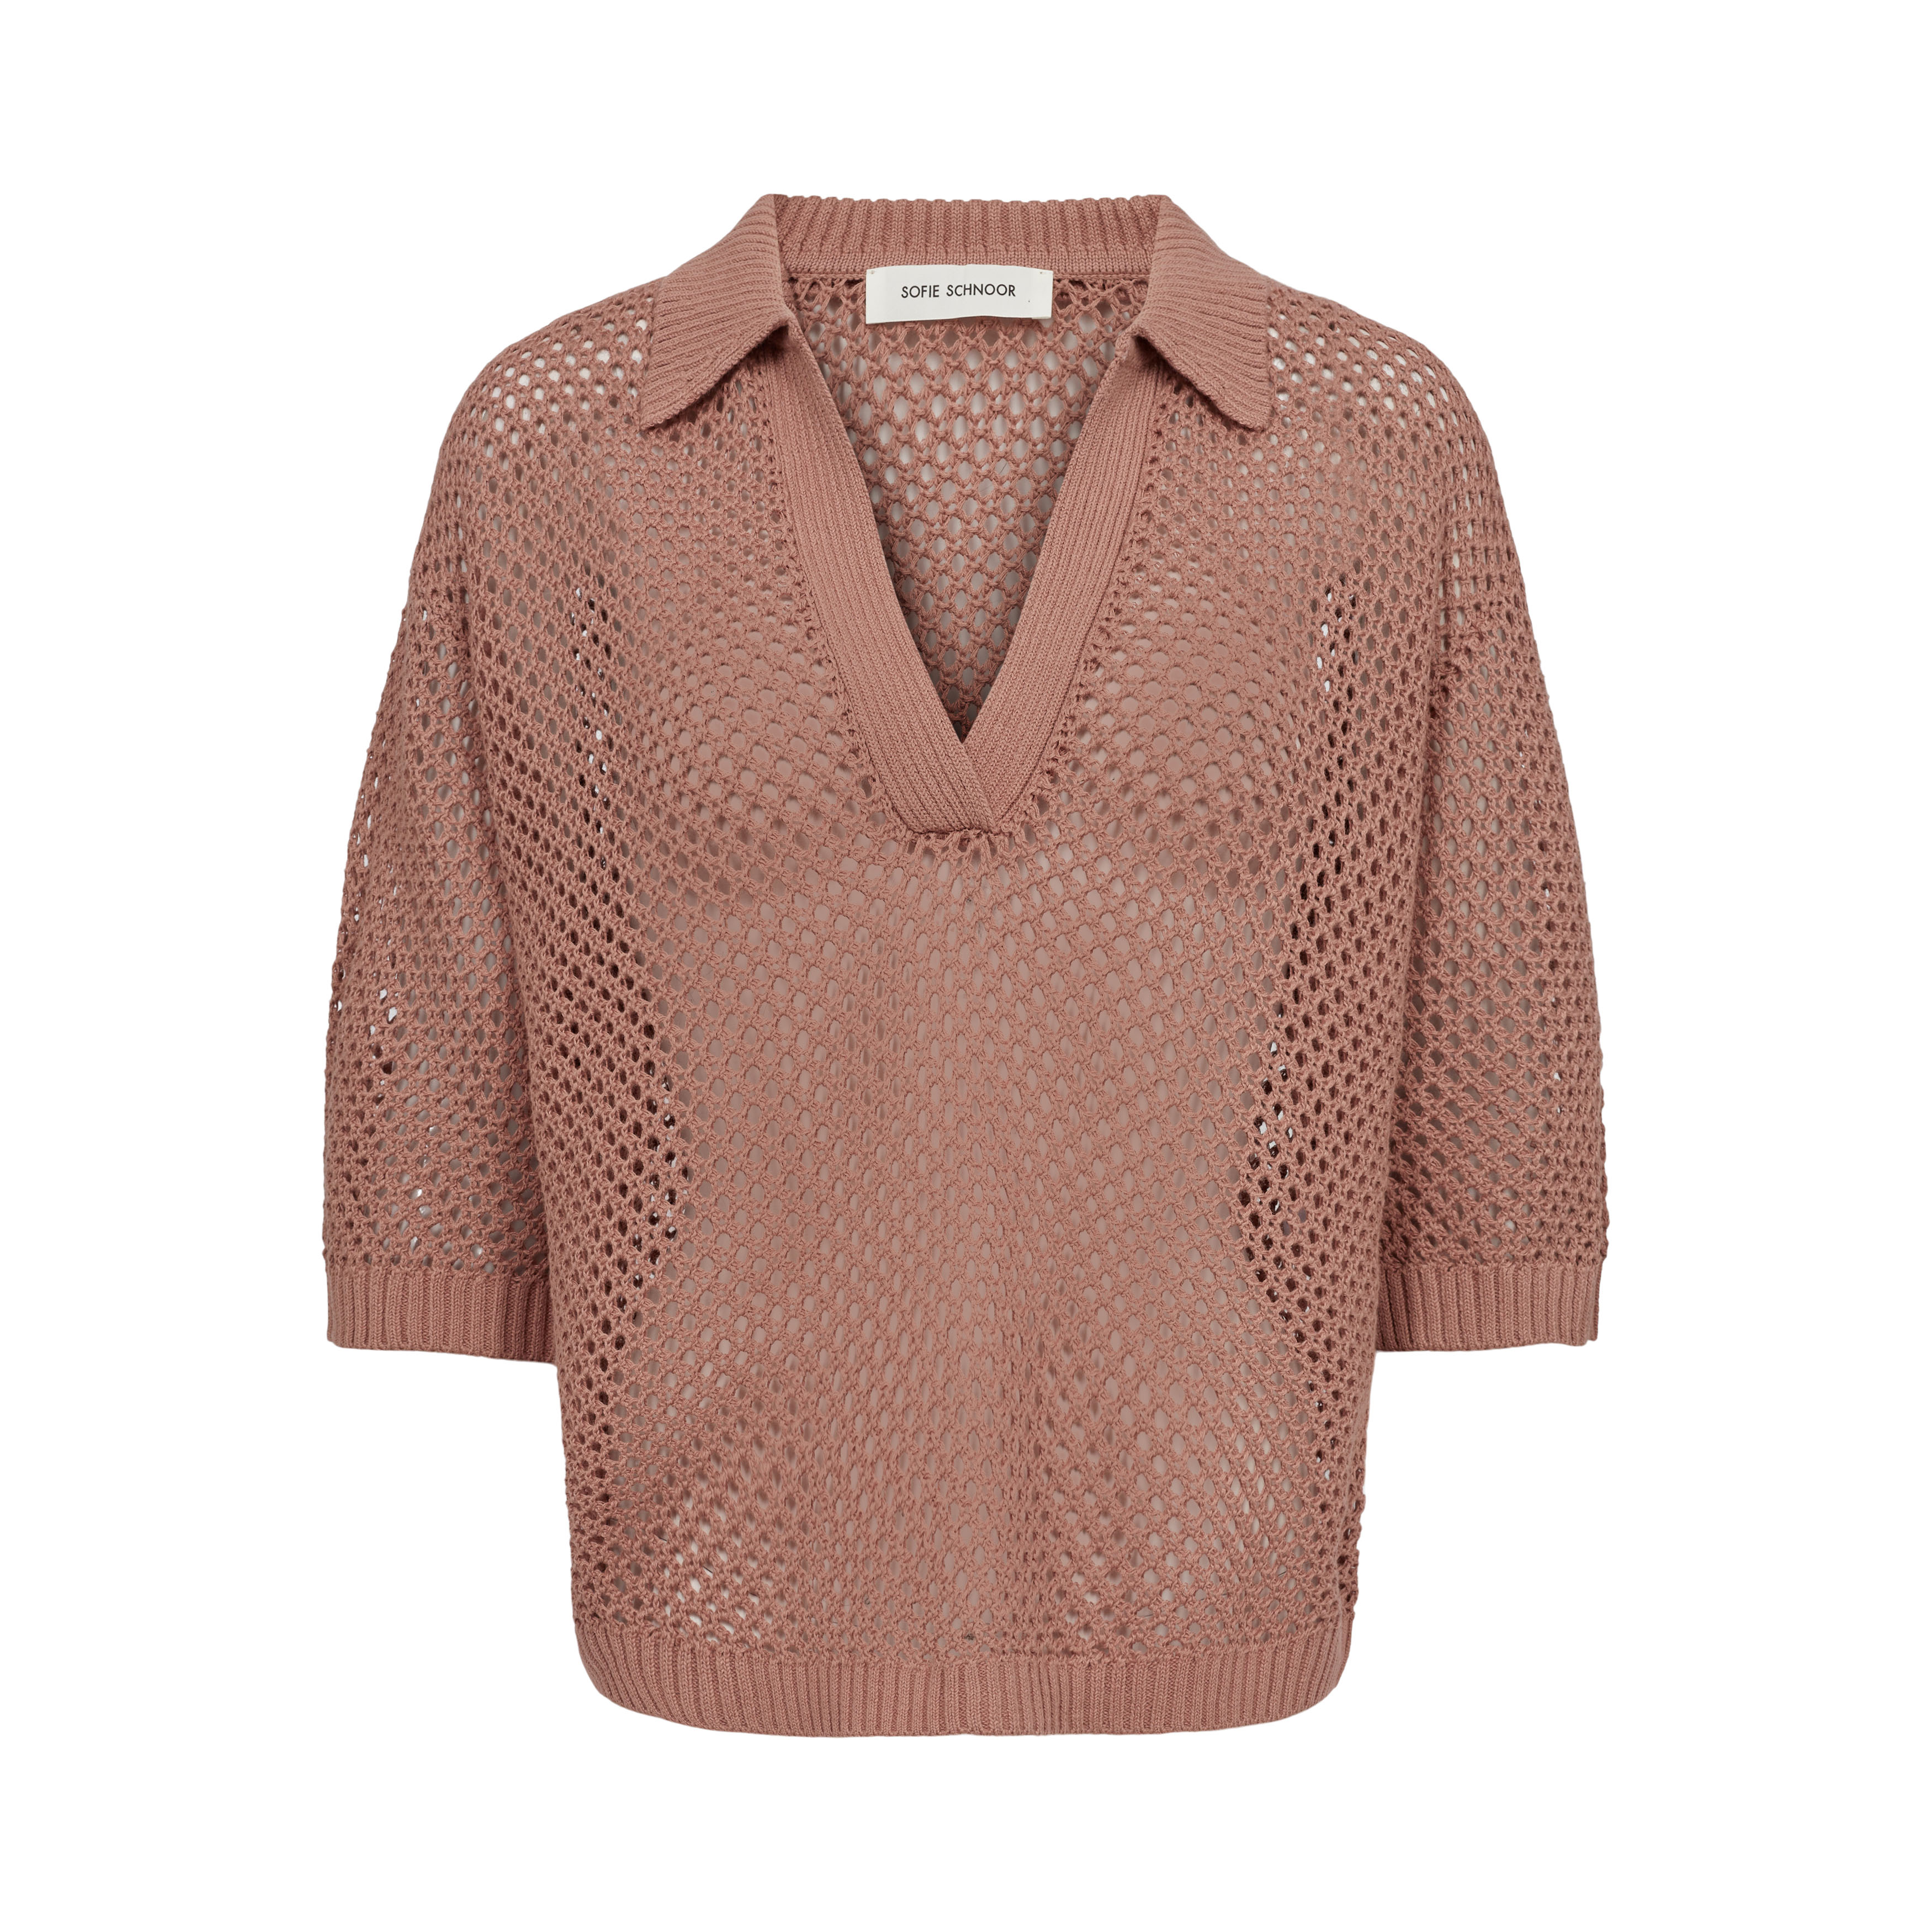 SOFIE SCHNOOR Knit Blouse - Rosy Brown